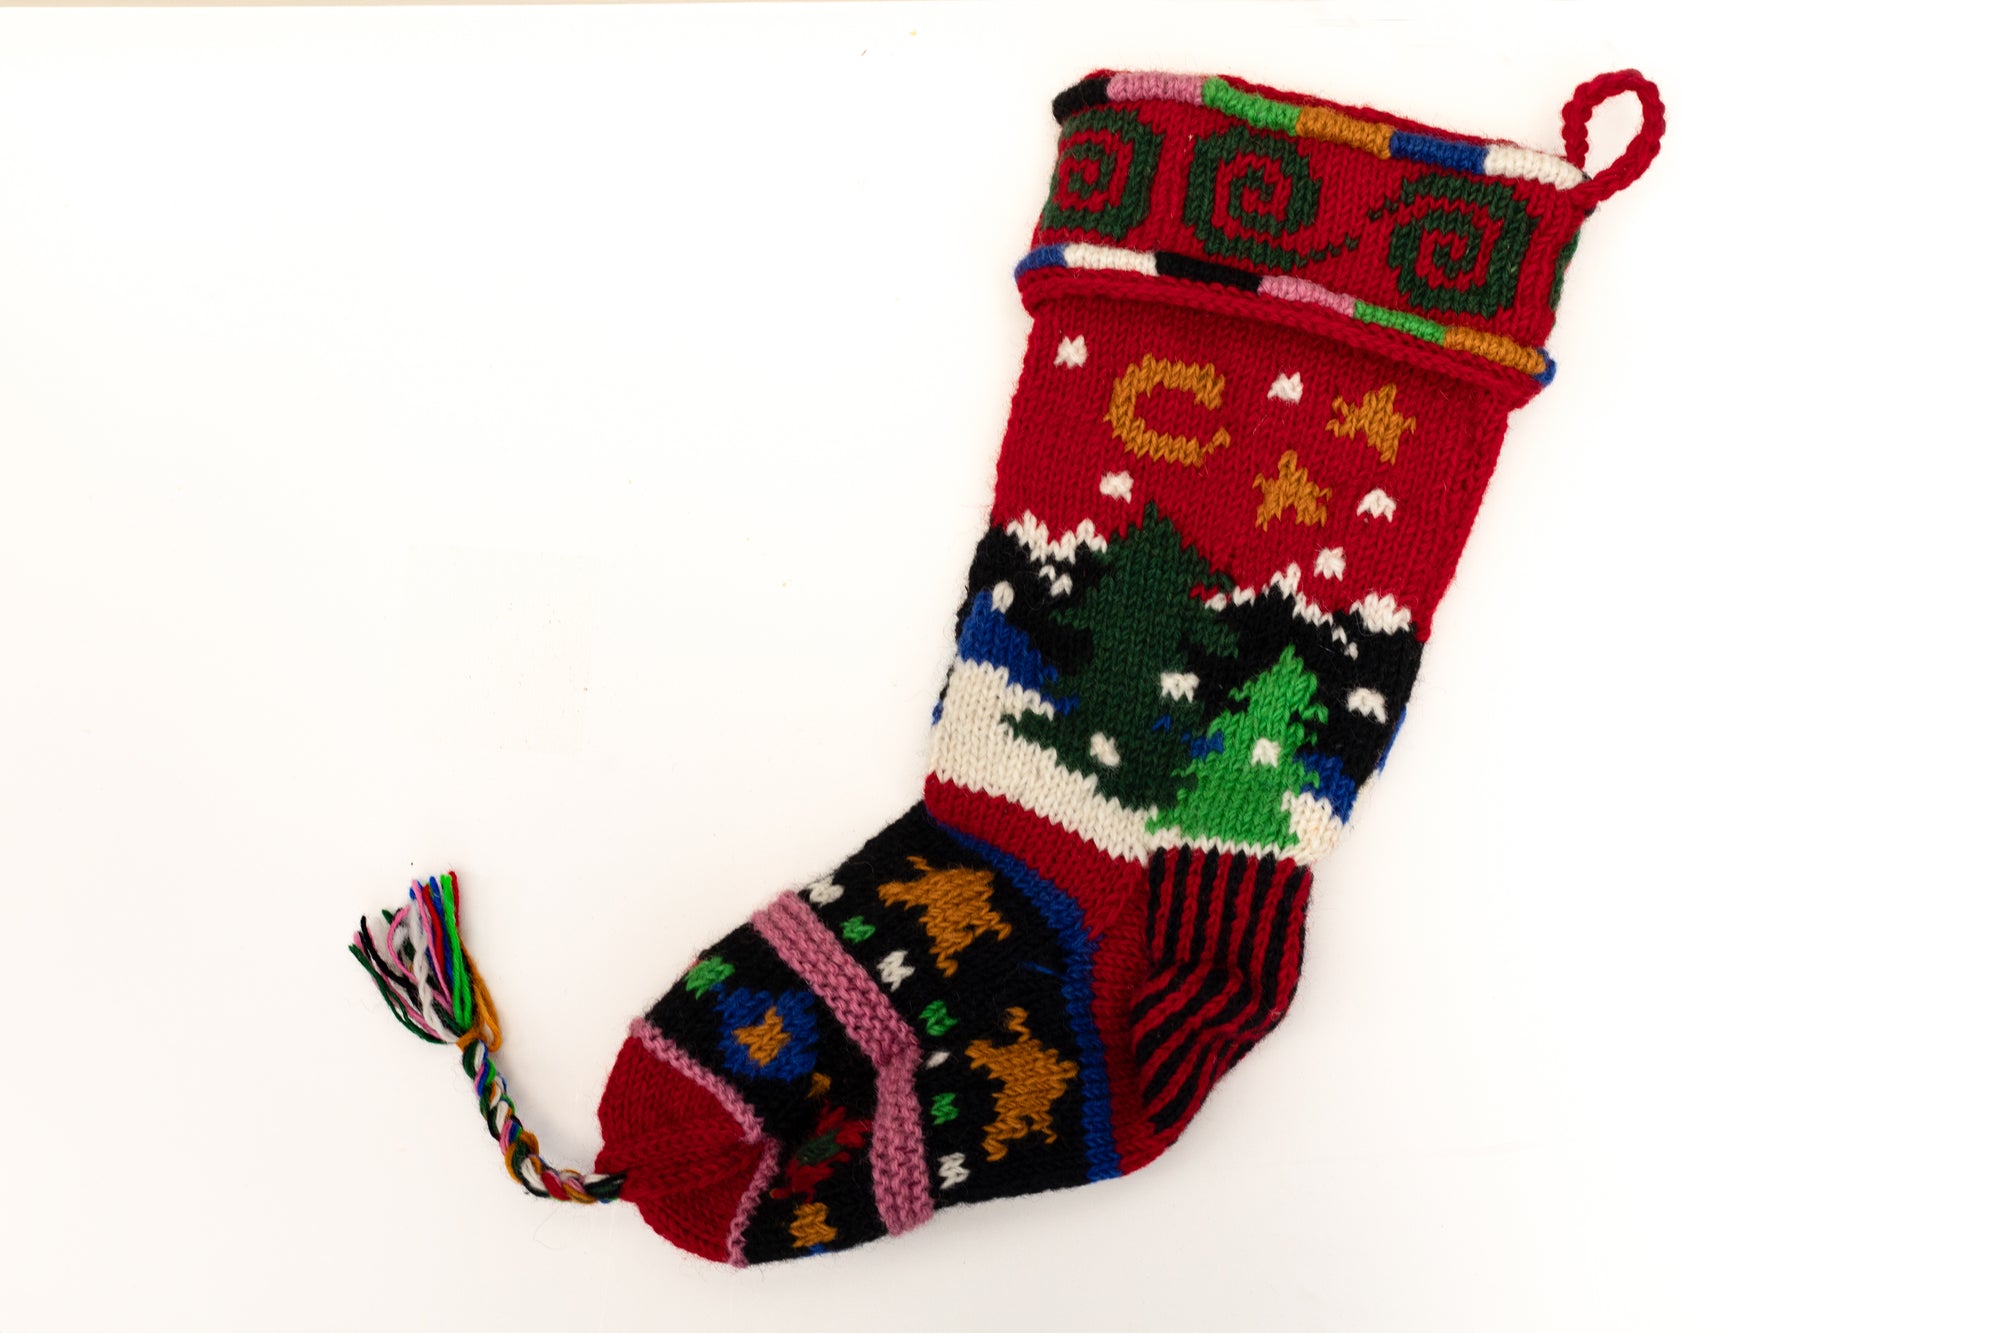 Knit Christmas Stocking with Mountain Tree Design (Red) - Made in Nepal